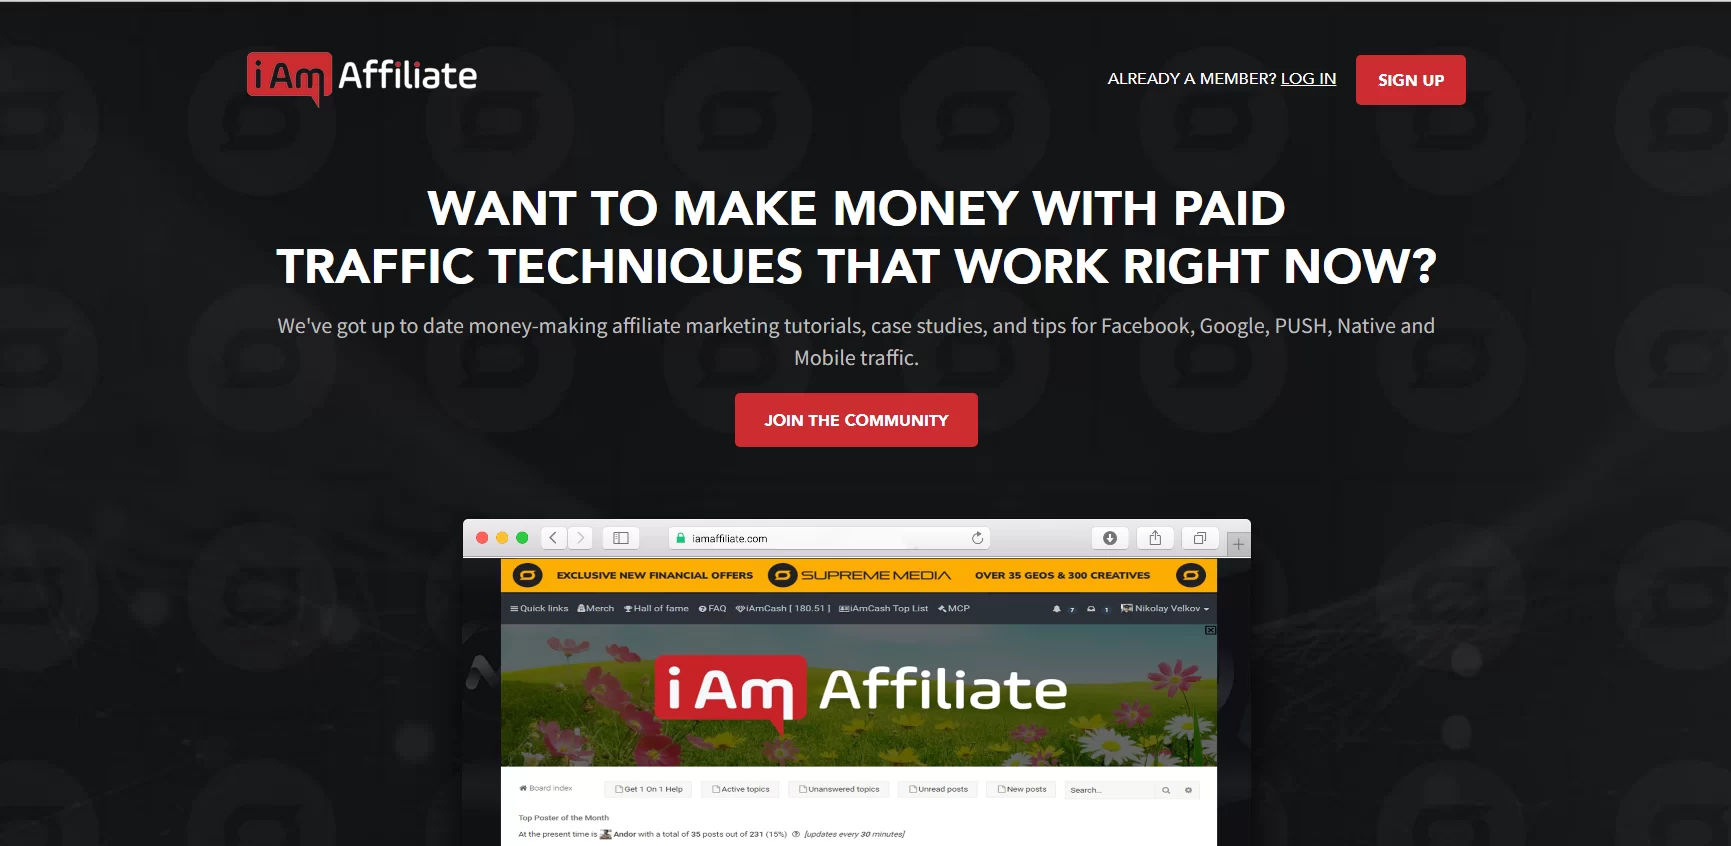 What iAmAffiliate Is All About